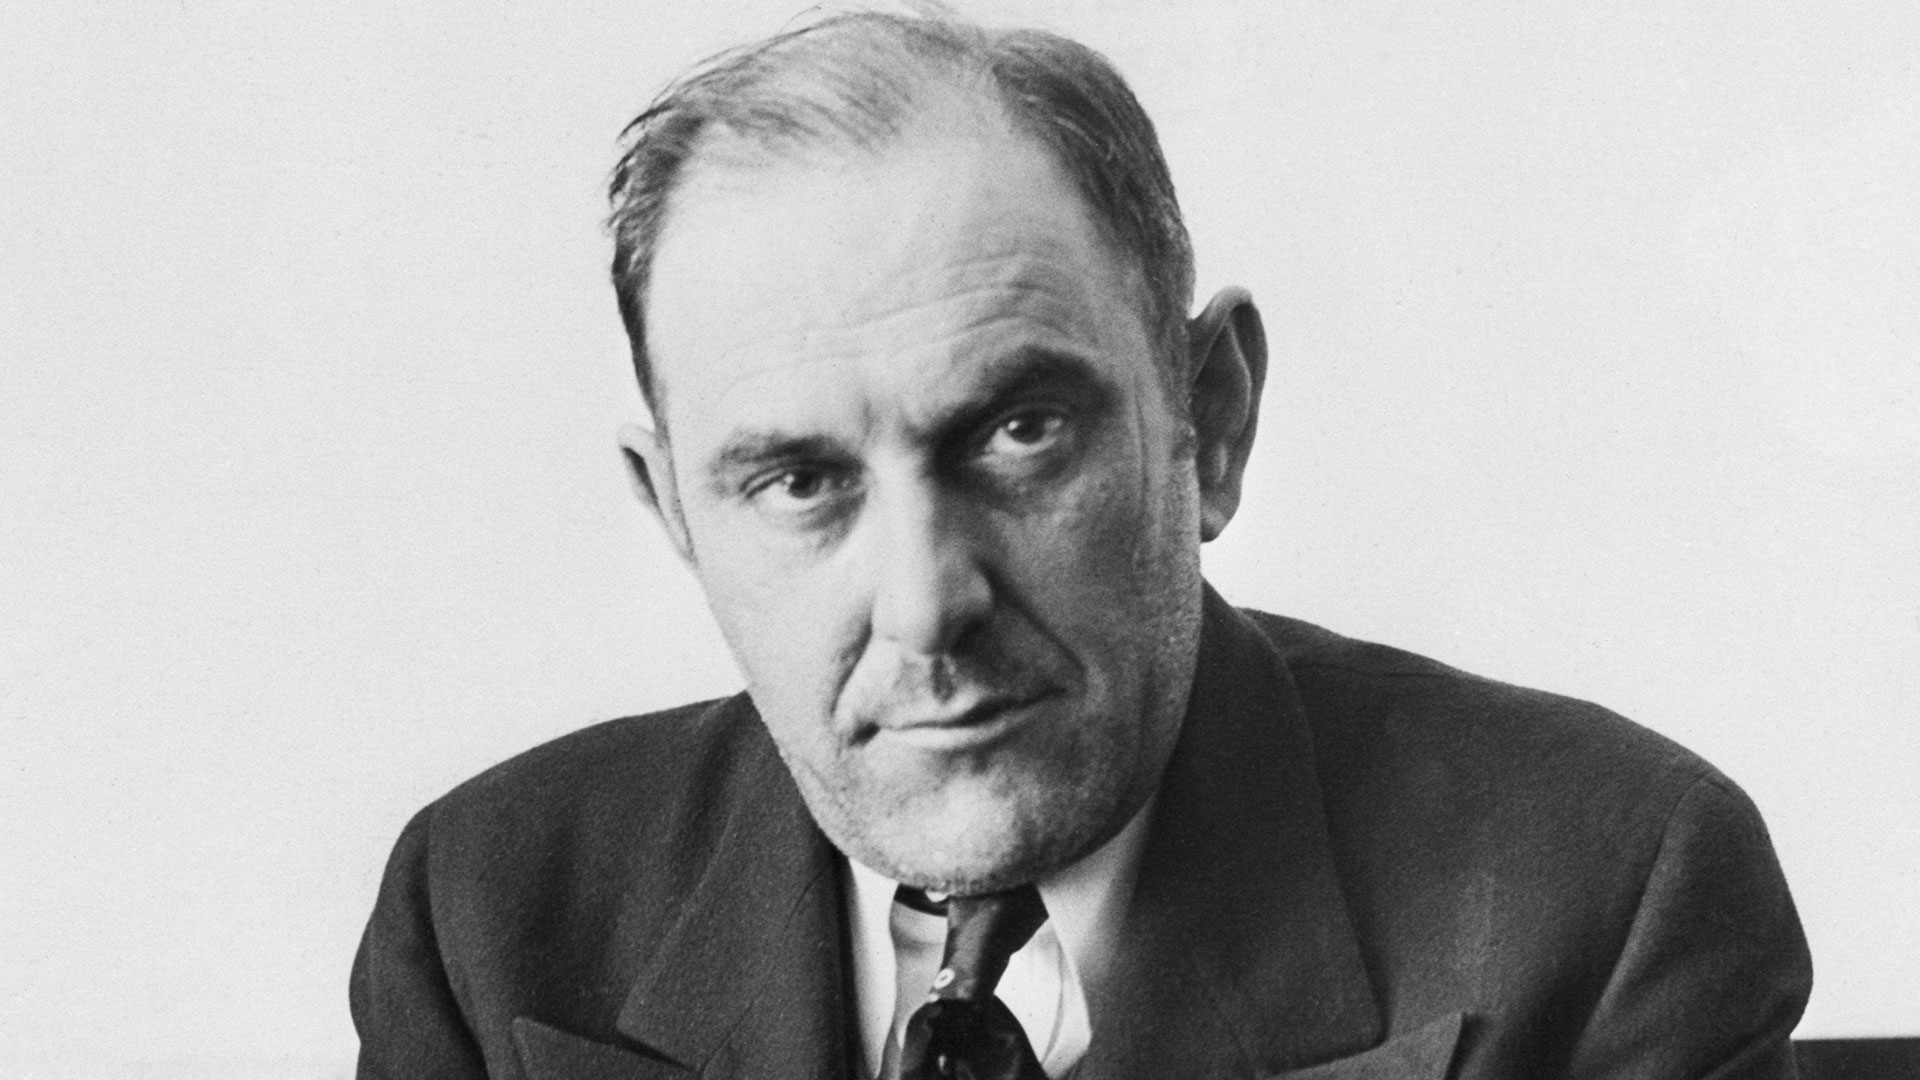 (Original Caption) 1937- Photo shows - "Count" Victor Lustig (notorious counterfeiter)- waist up.